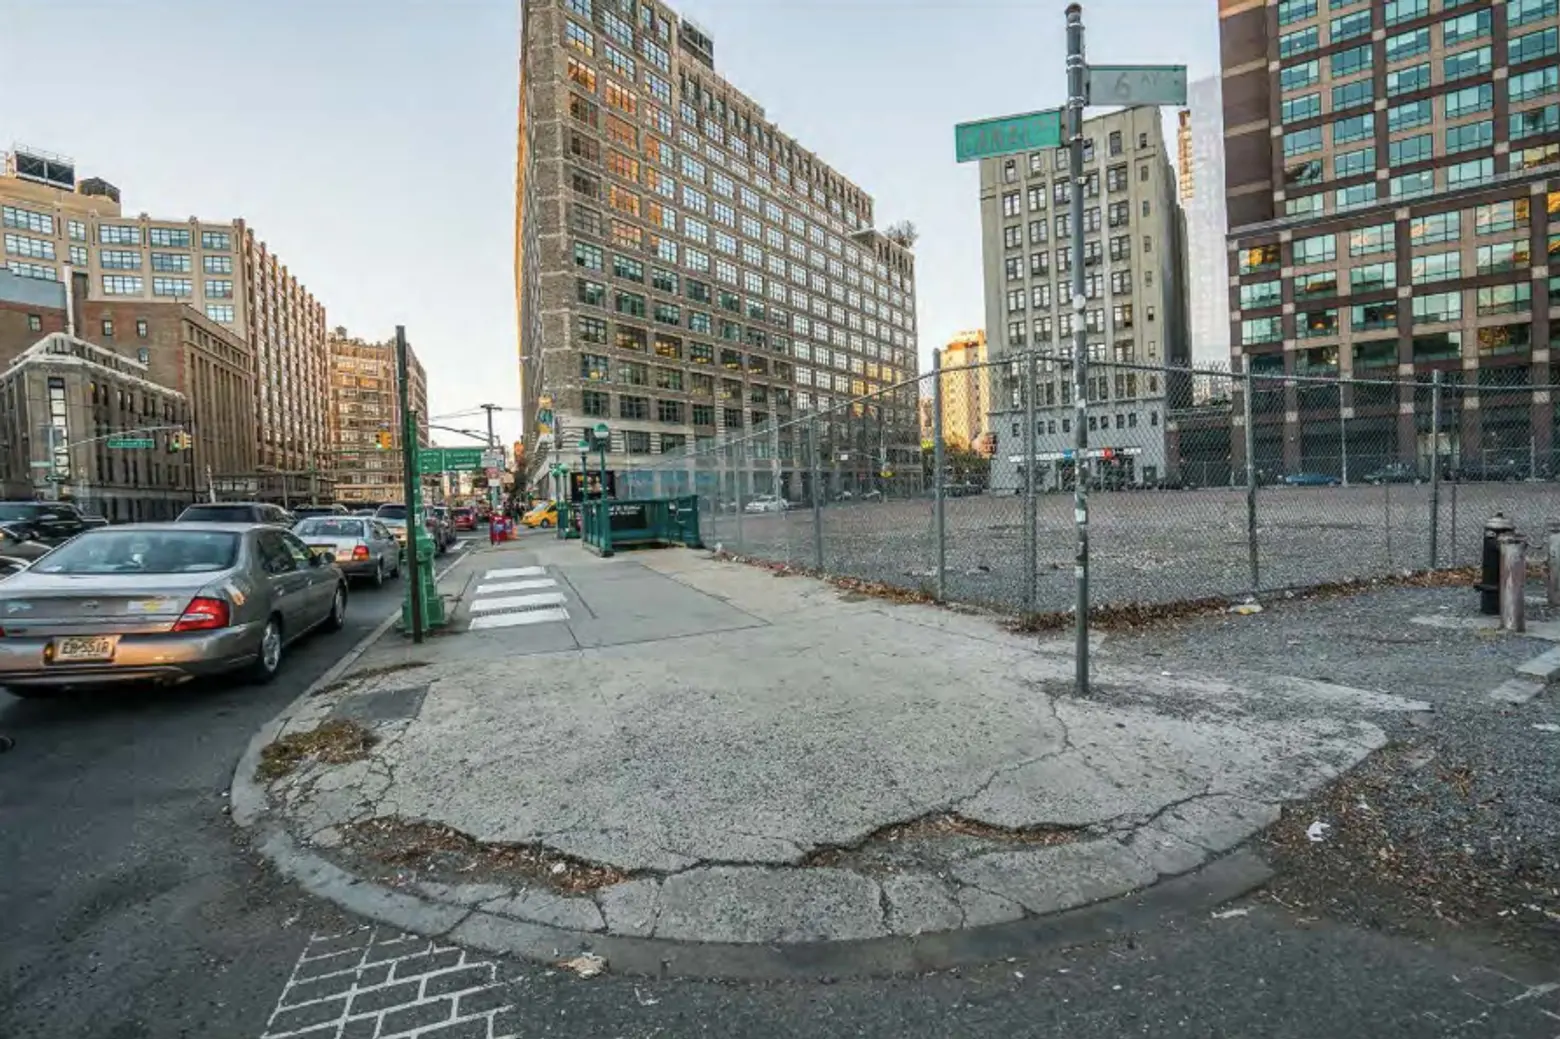 Settlement promises curb cuts will be installed or upgraded at every corner in NYC